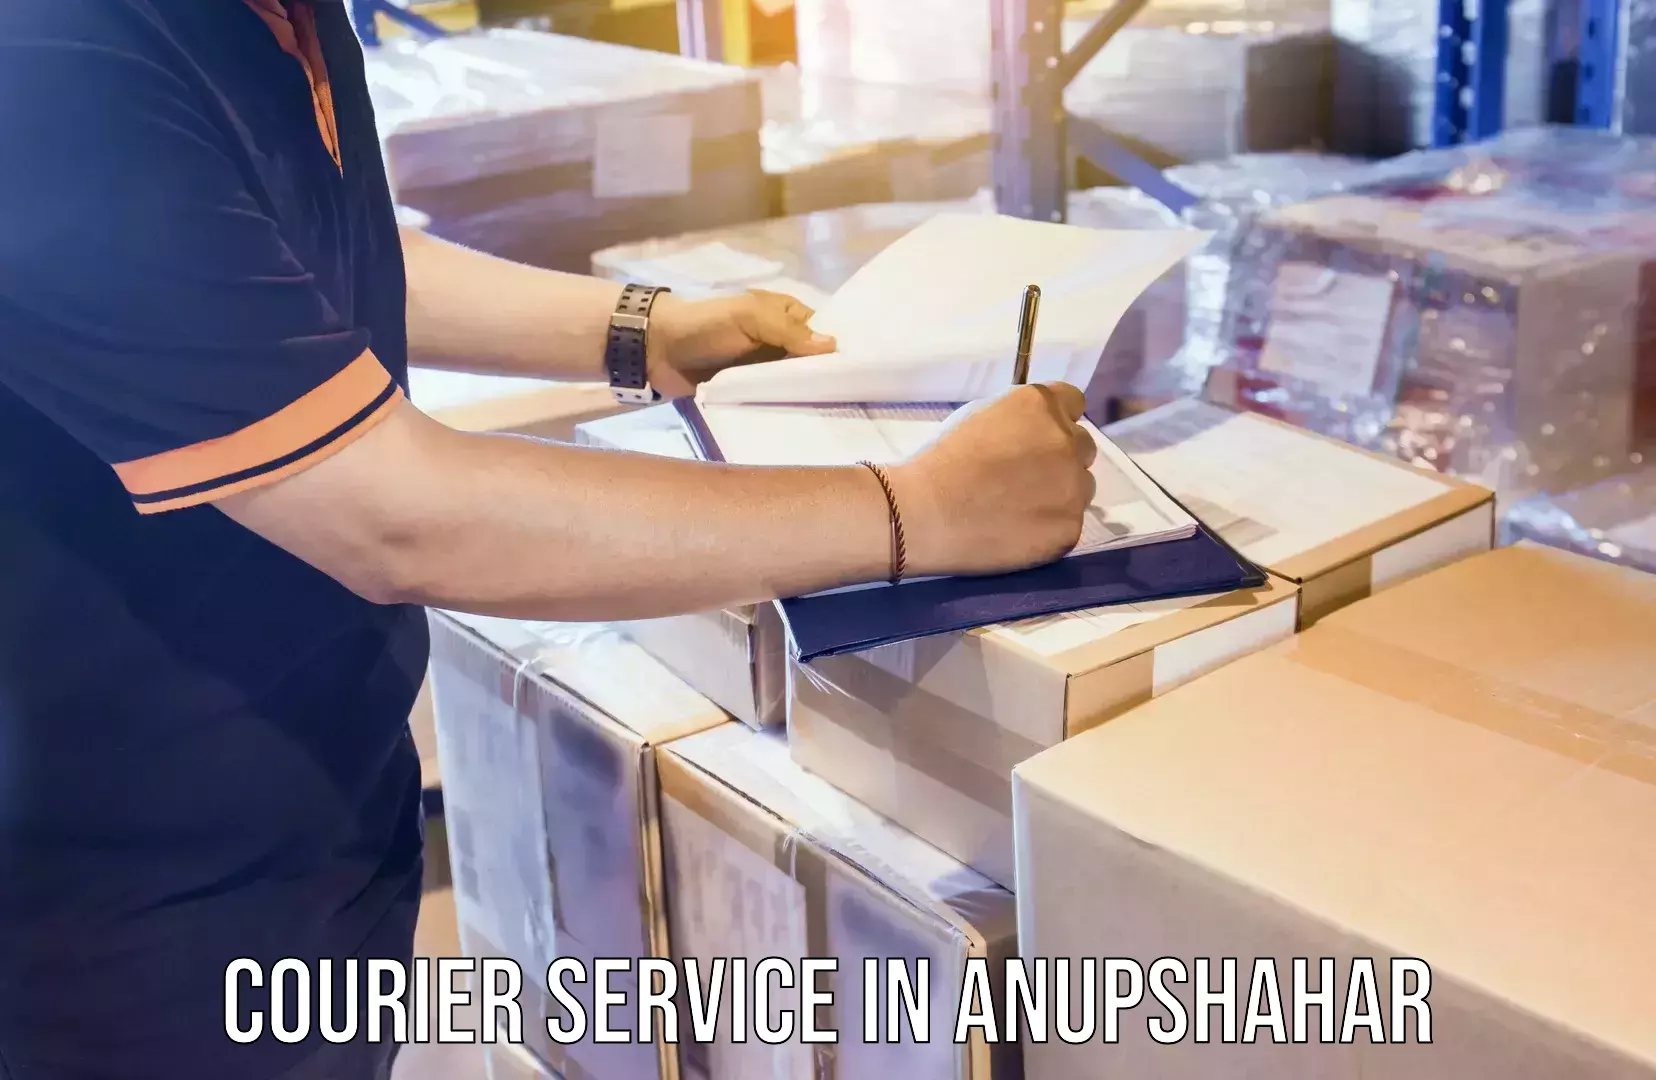 Fast delivery service in Anupshahar